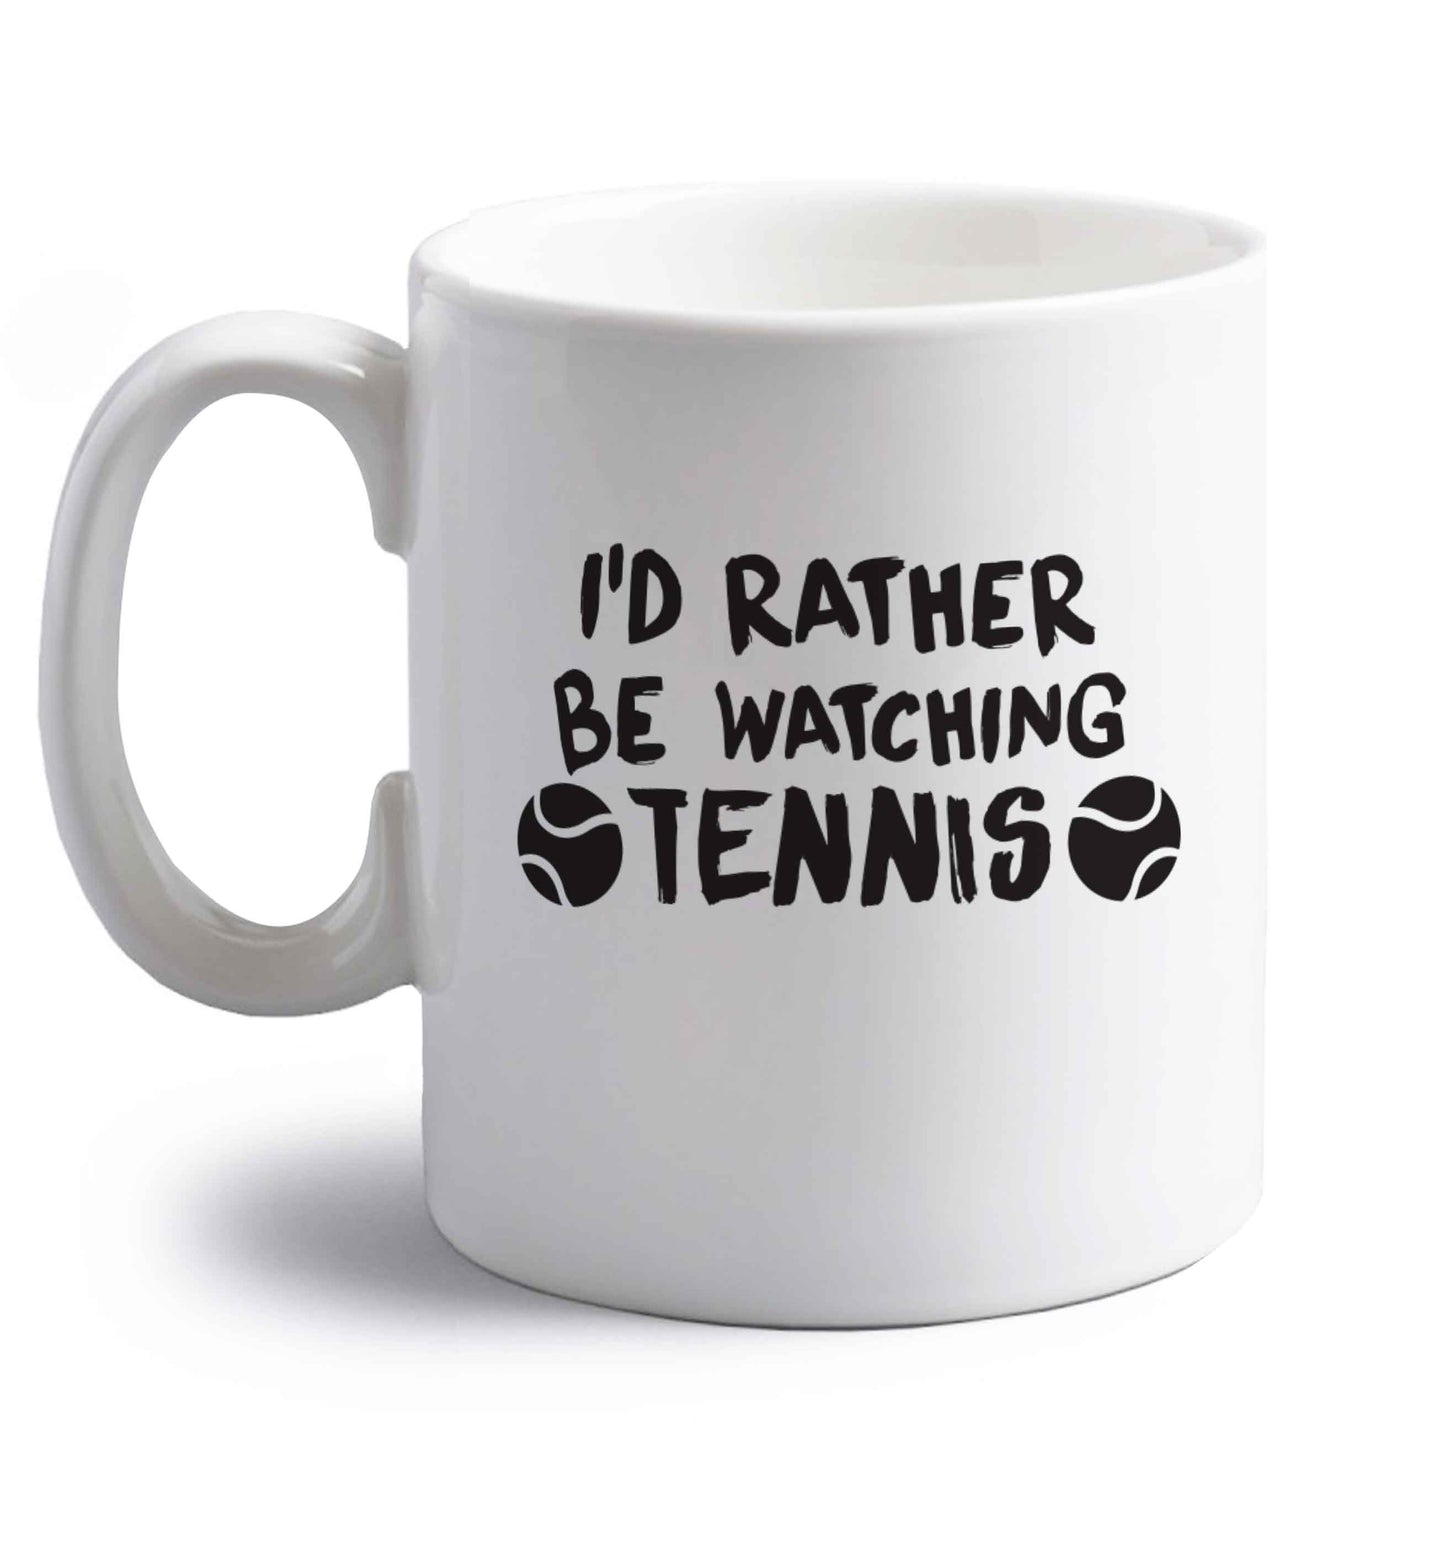 I'd rather be watching the tennis right handed white ceramic mug 